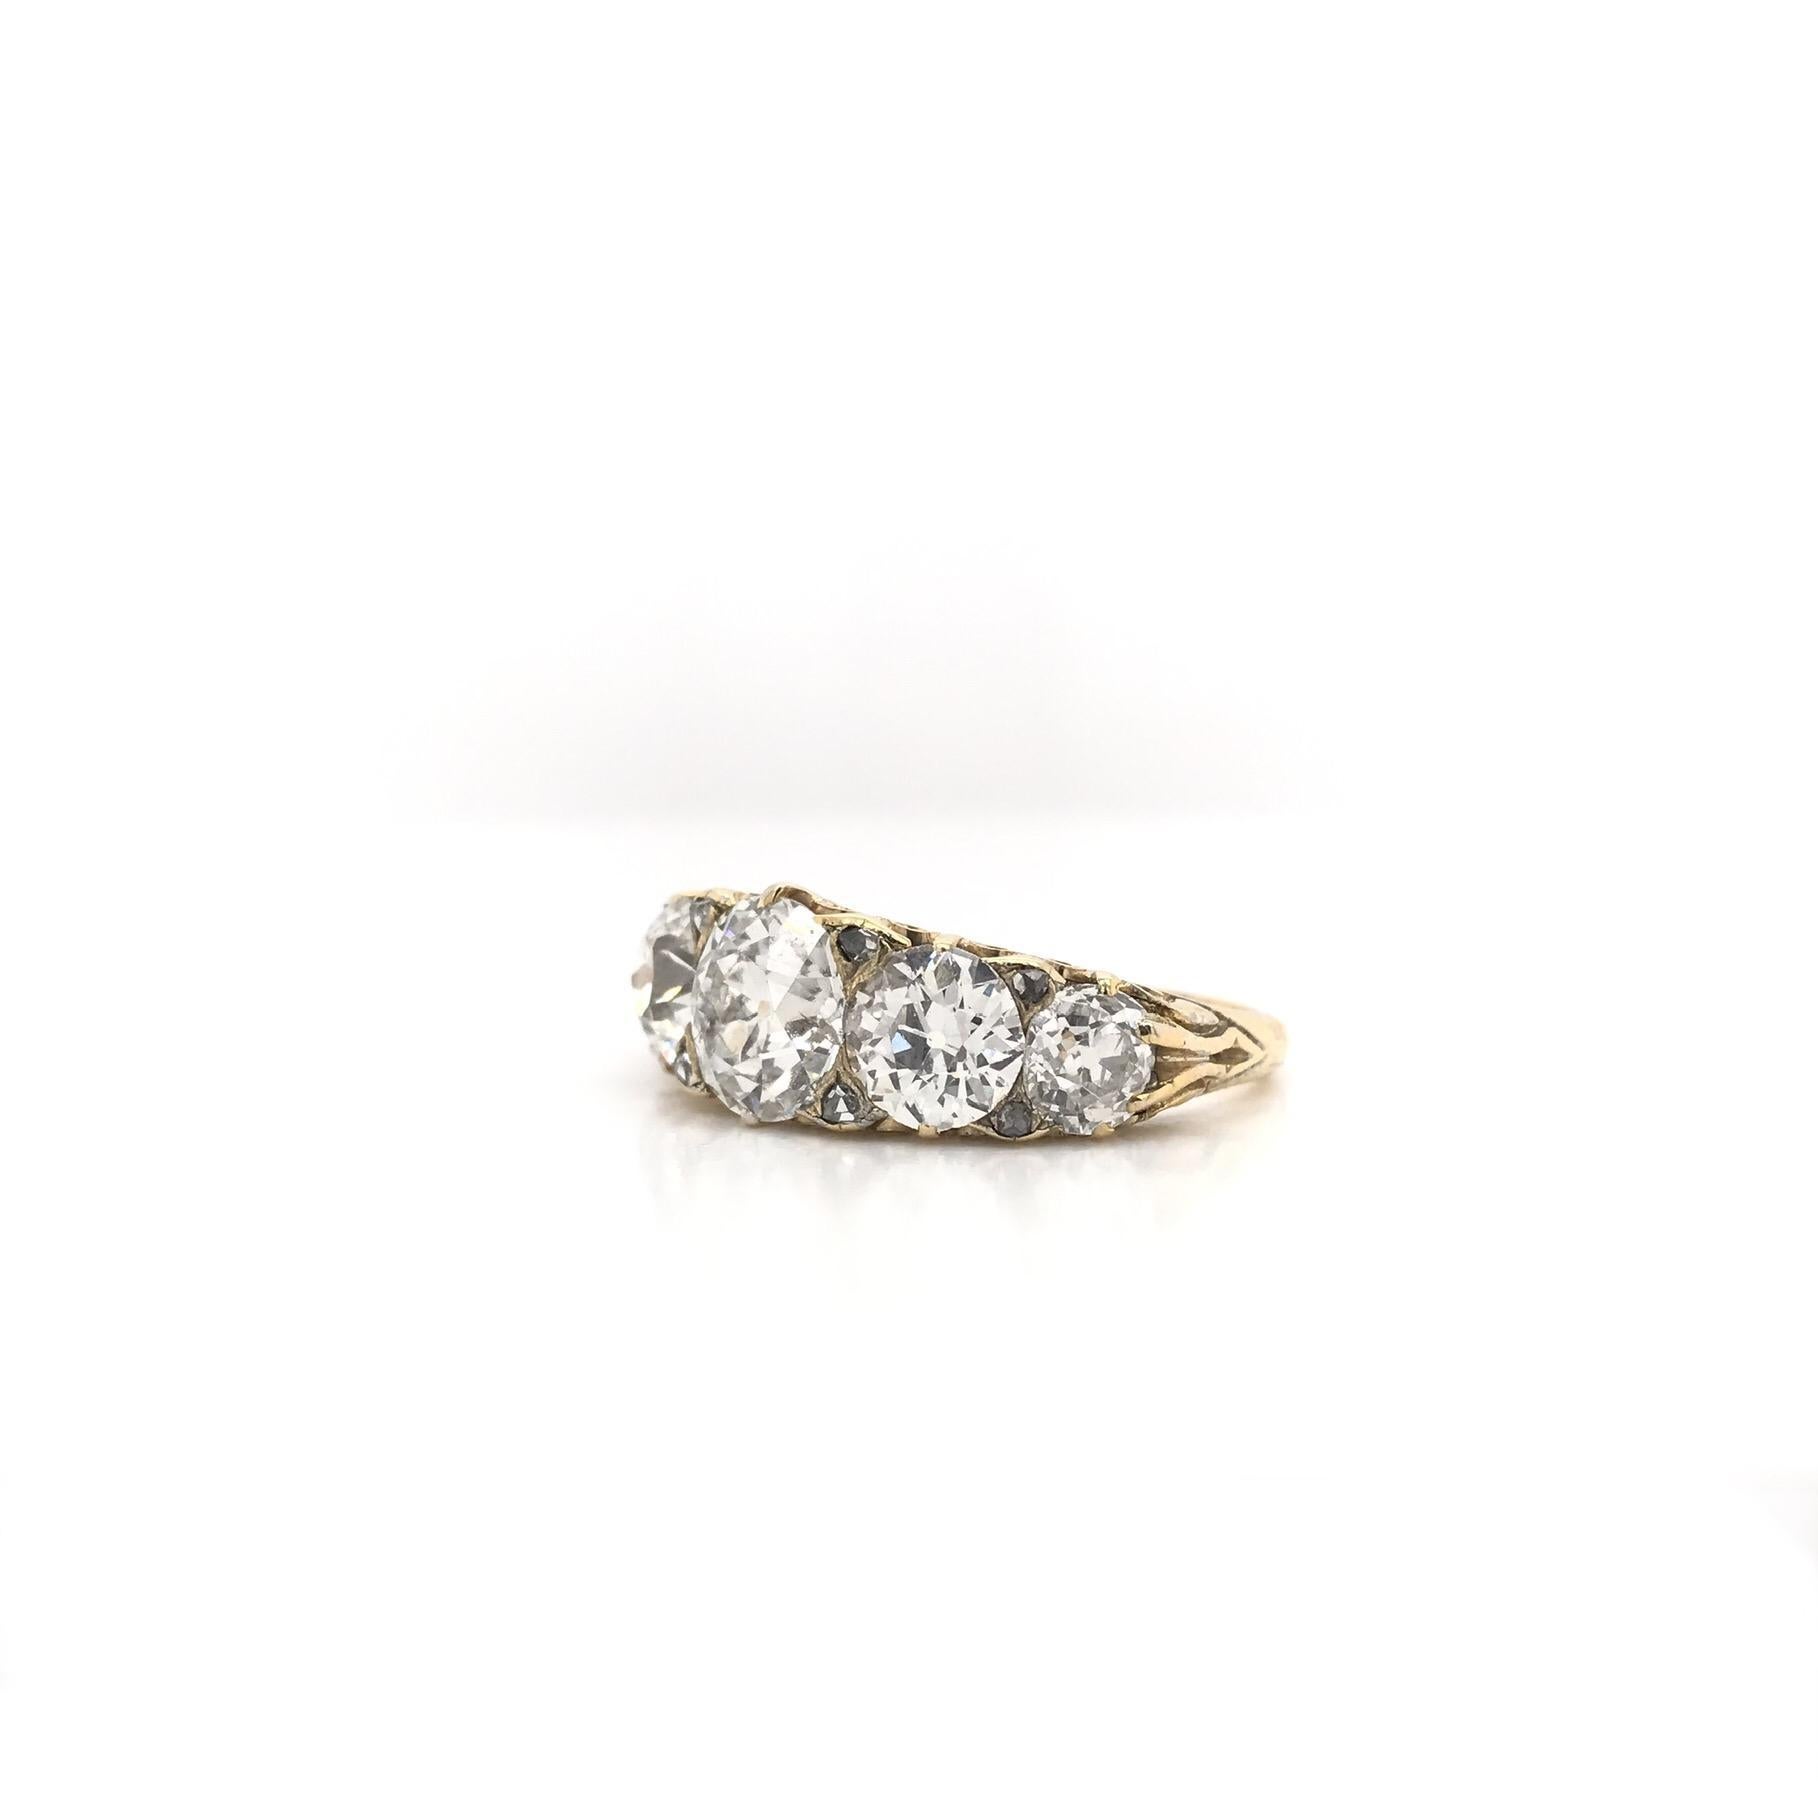 This exceptional antique piece was crafted sometime during the Edwardian design period (1900-1920). The 18K gold setting proudly displays five stunning Old European cut antique diamonds. The center diamond measures approximately 2 carats, grades